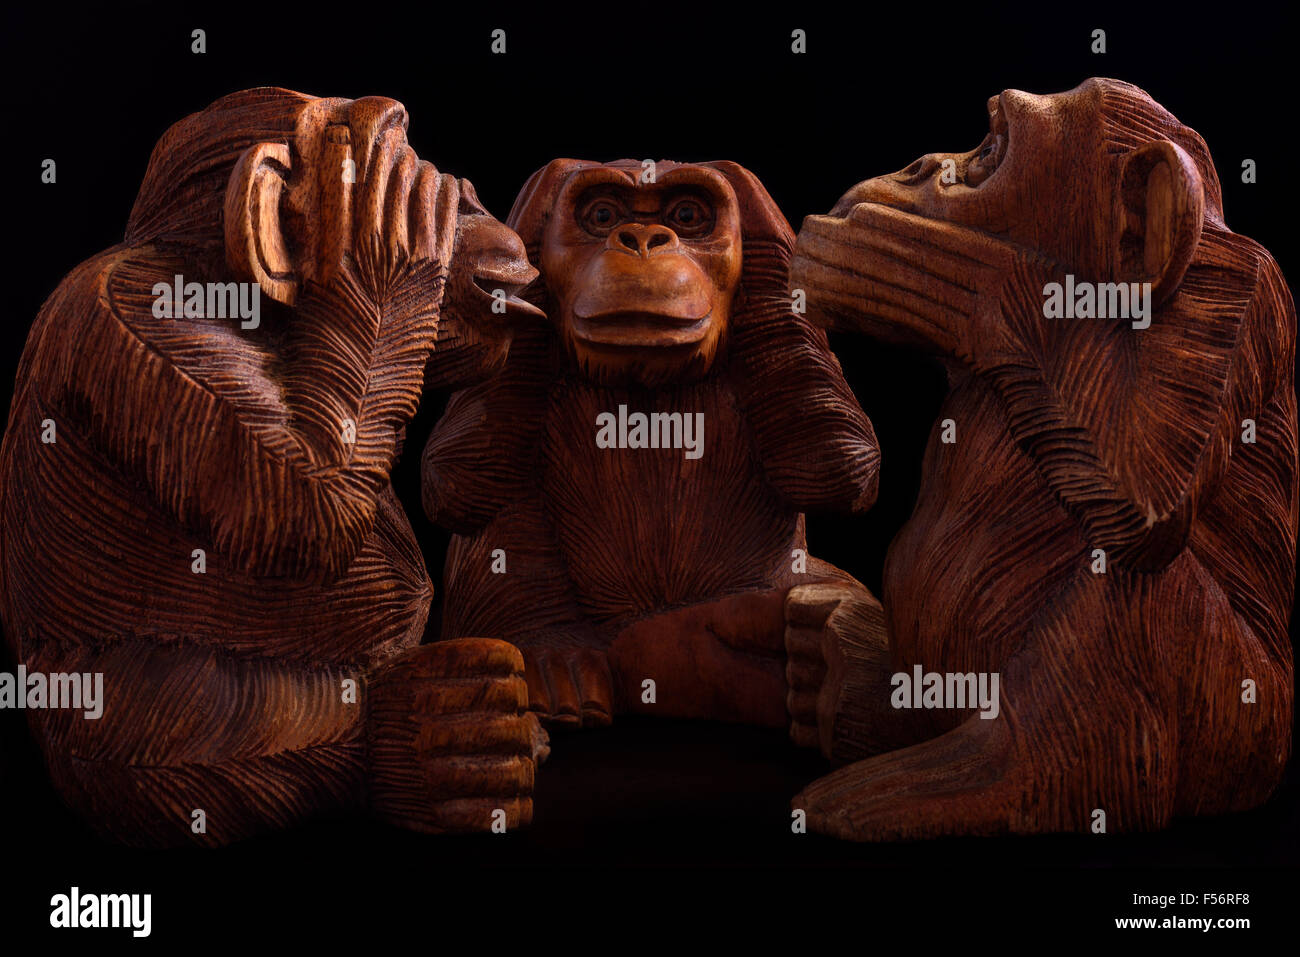 Three wise monkeys. Figurines of wood on a black background. Stock Photo